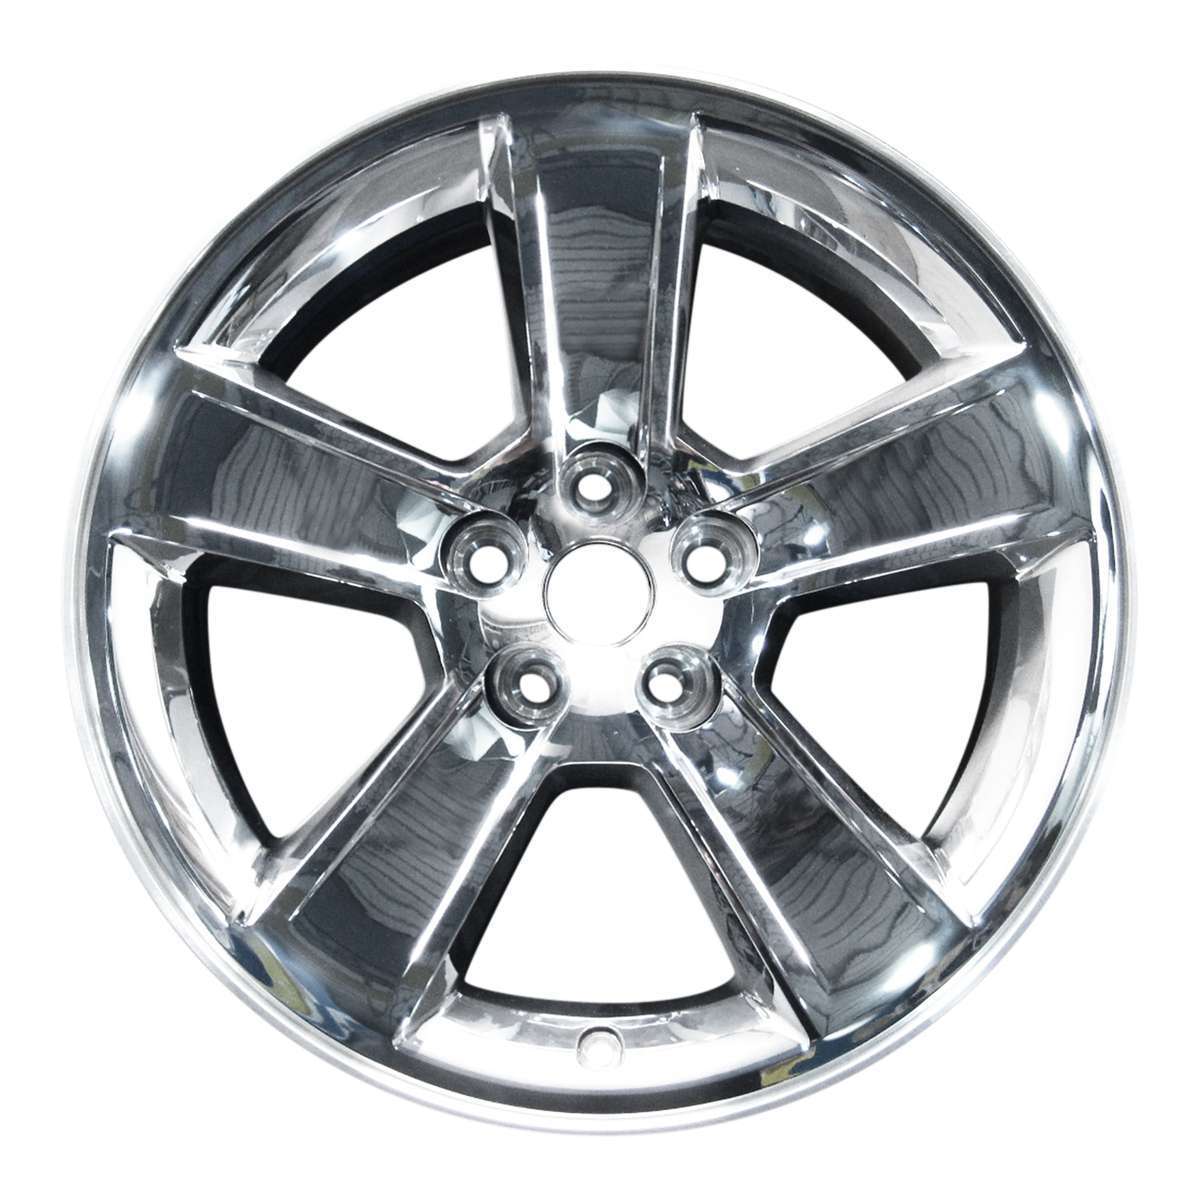 2009 Dodge Charger New 18" Replacement Wheel Rim RW2295CCLAD